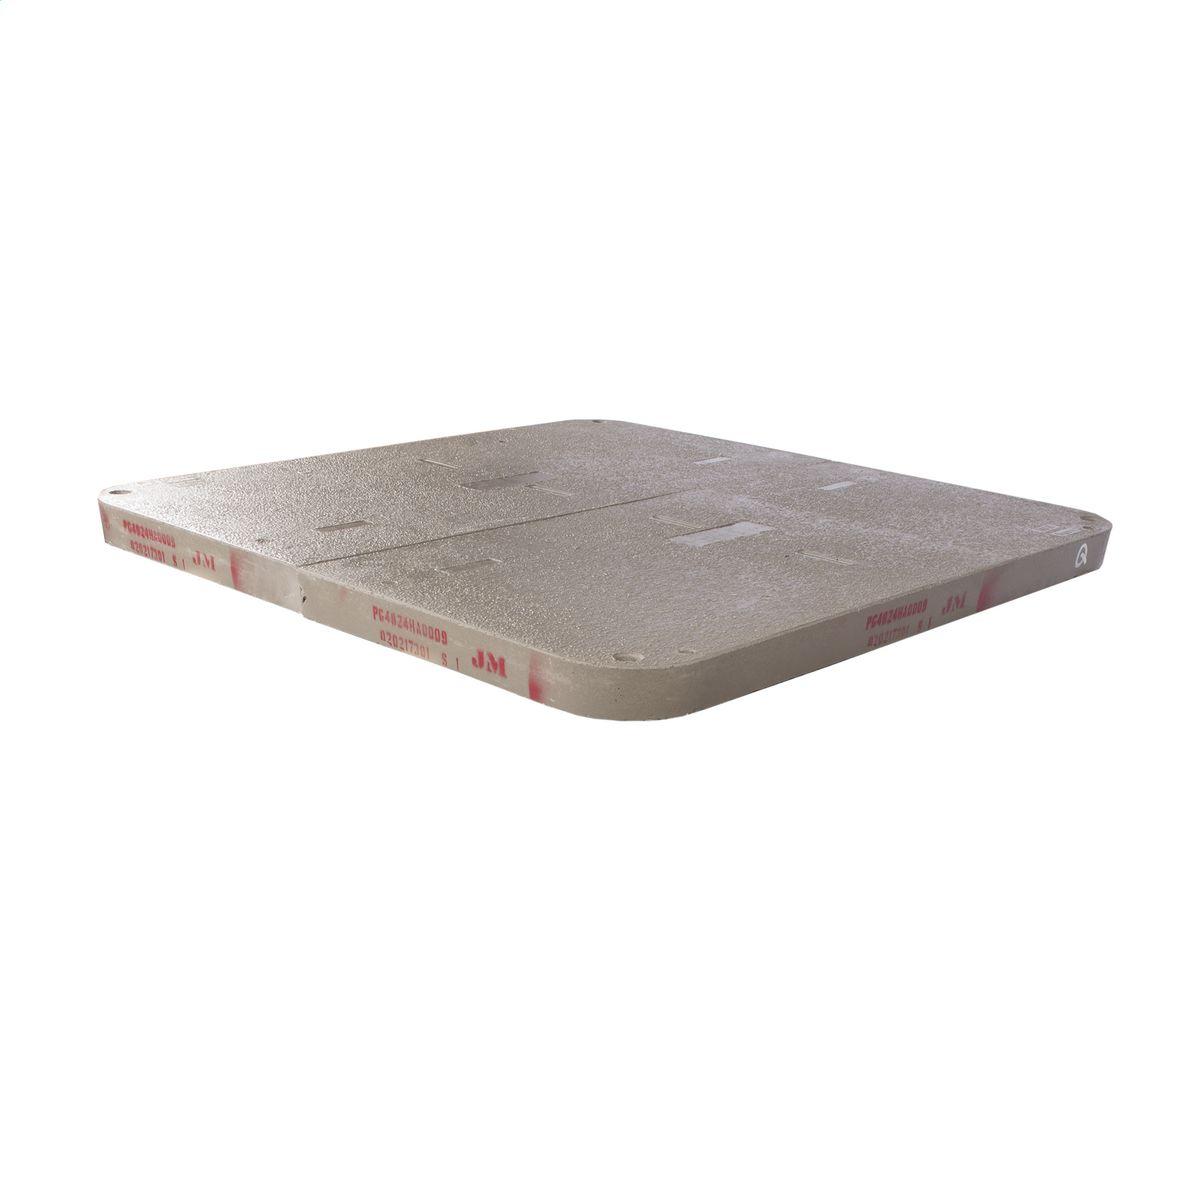 Hubbell PG3672HA0017 Cover, Polymer Concrete, Heavy Duty Tier 15,  36"x72"x3", 2-piece w/2 Bolts, Electric Logo 